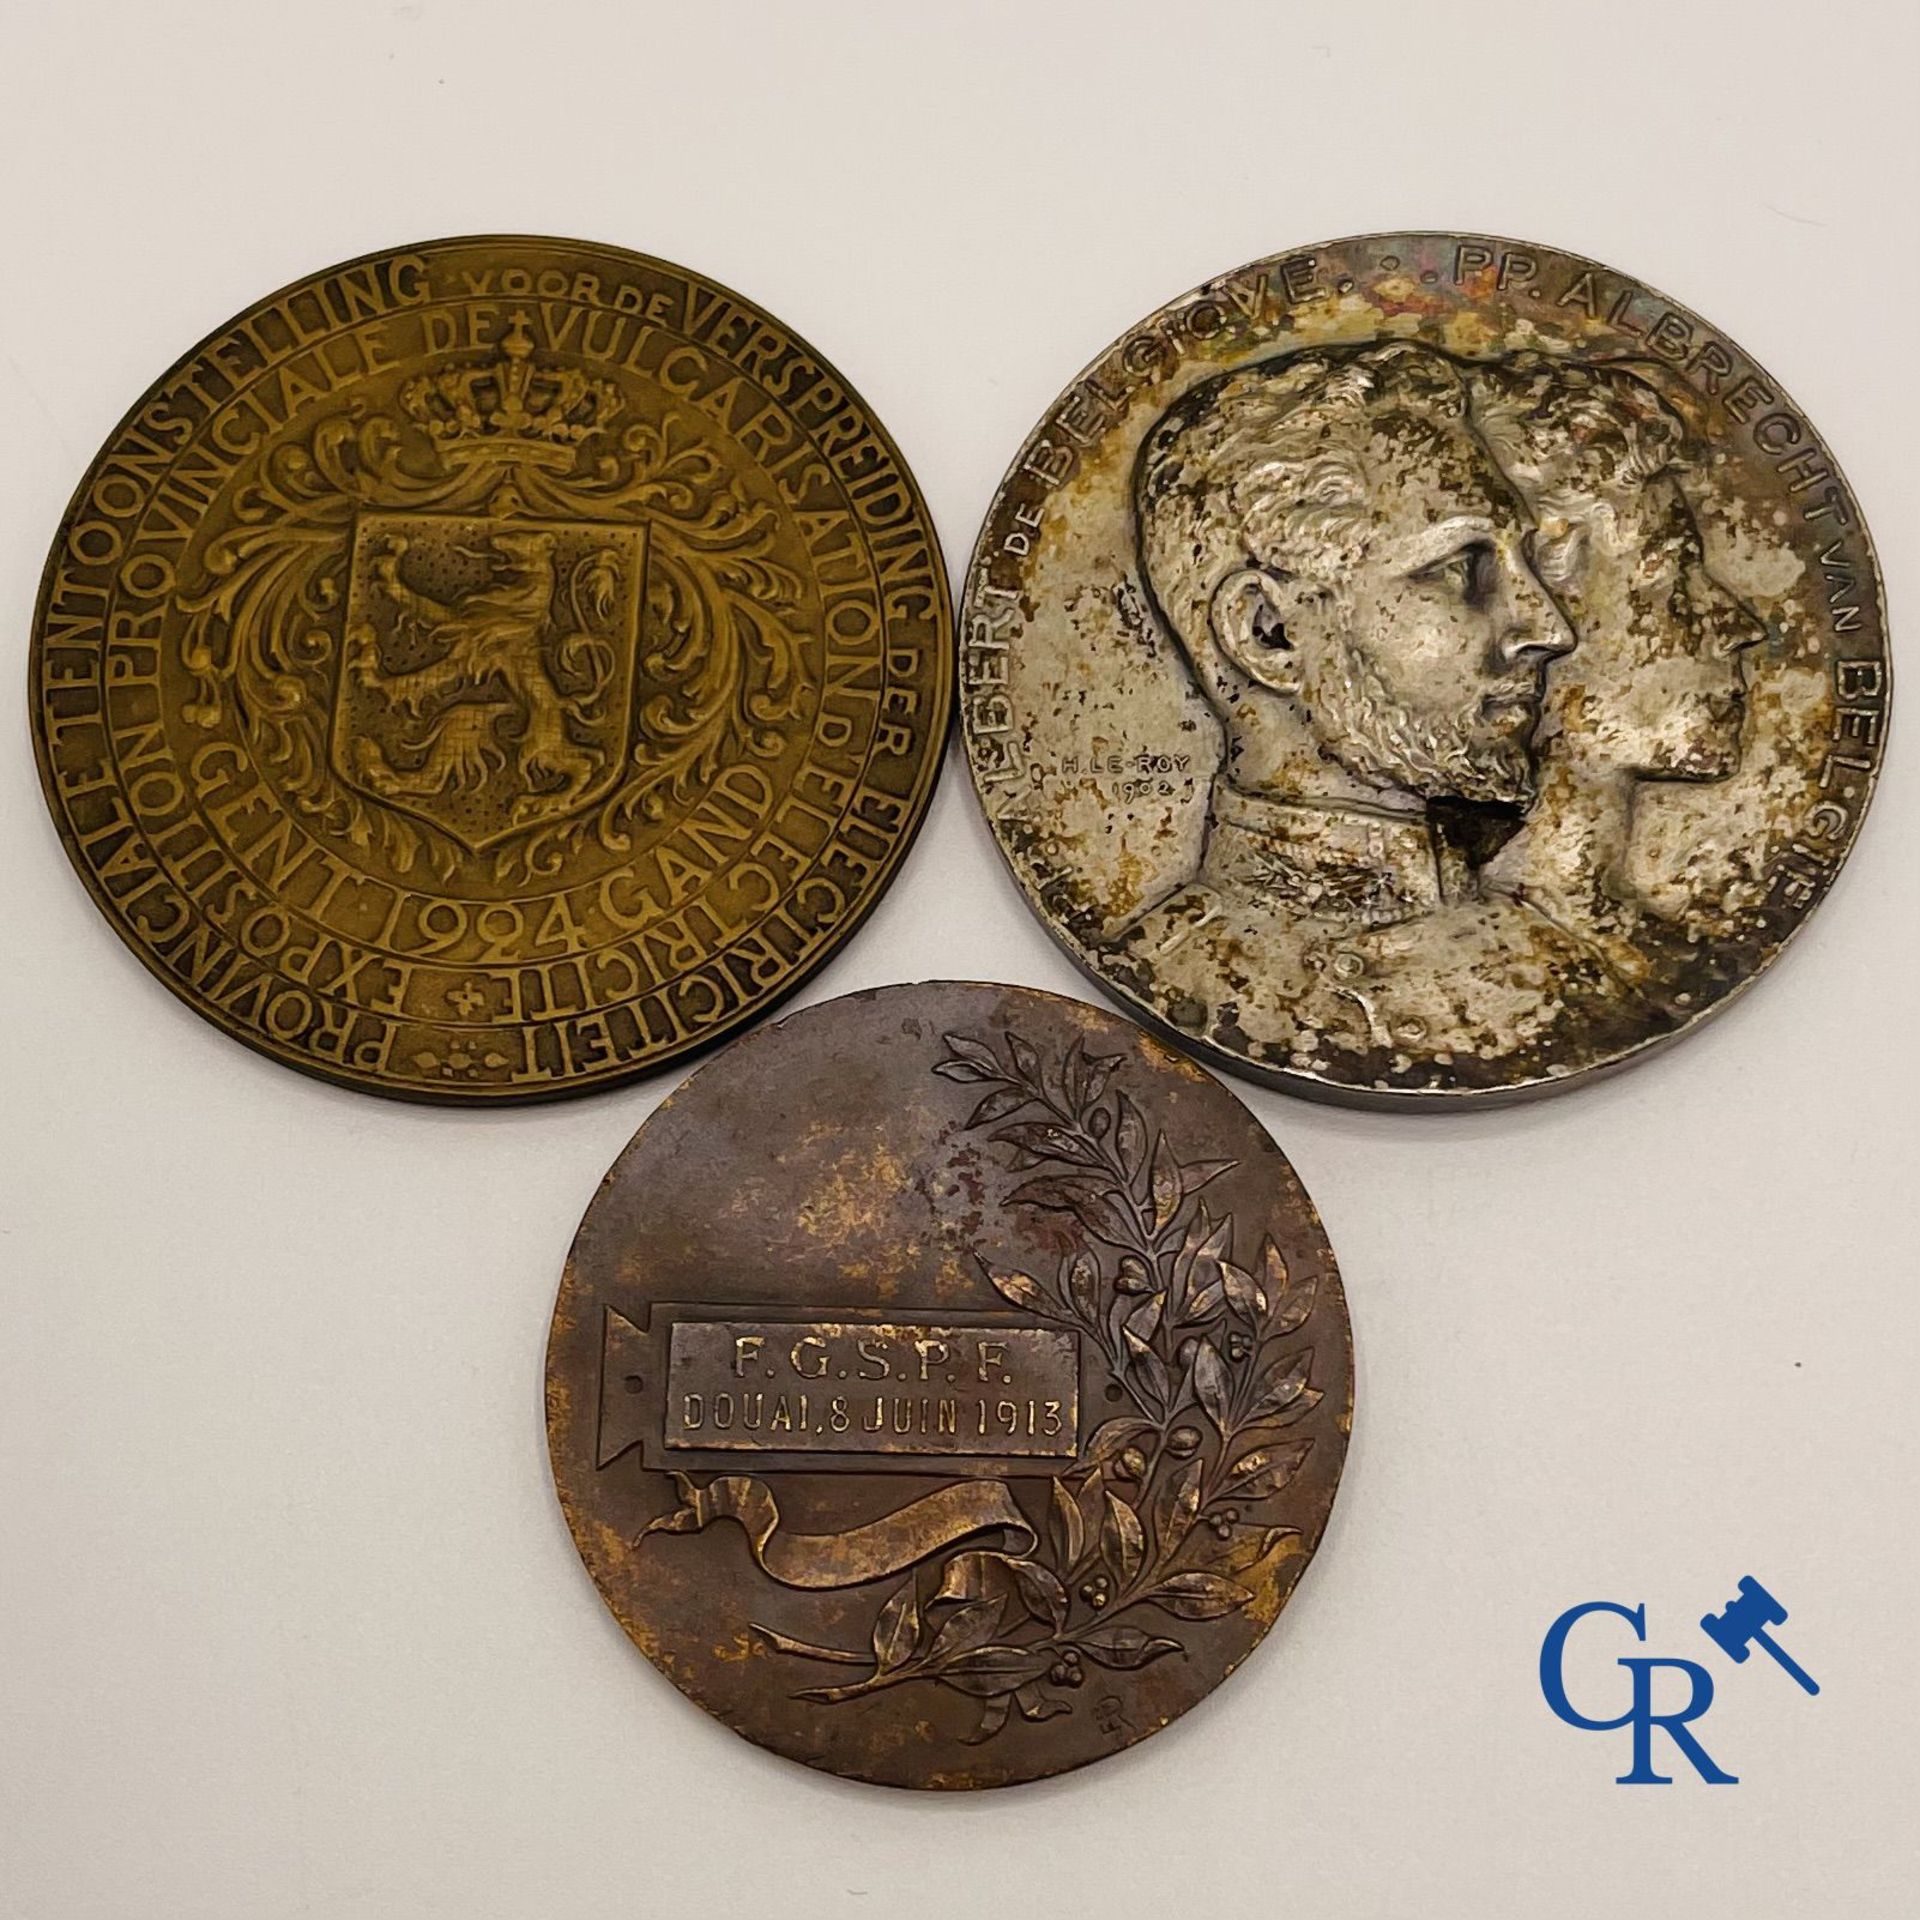 Commemorative Medals: Lot of 3 medals in bronze. - Image 2 of 2